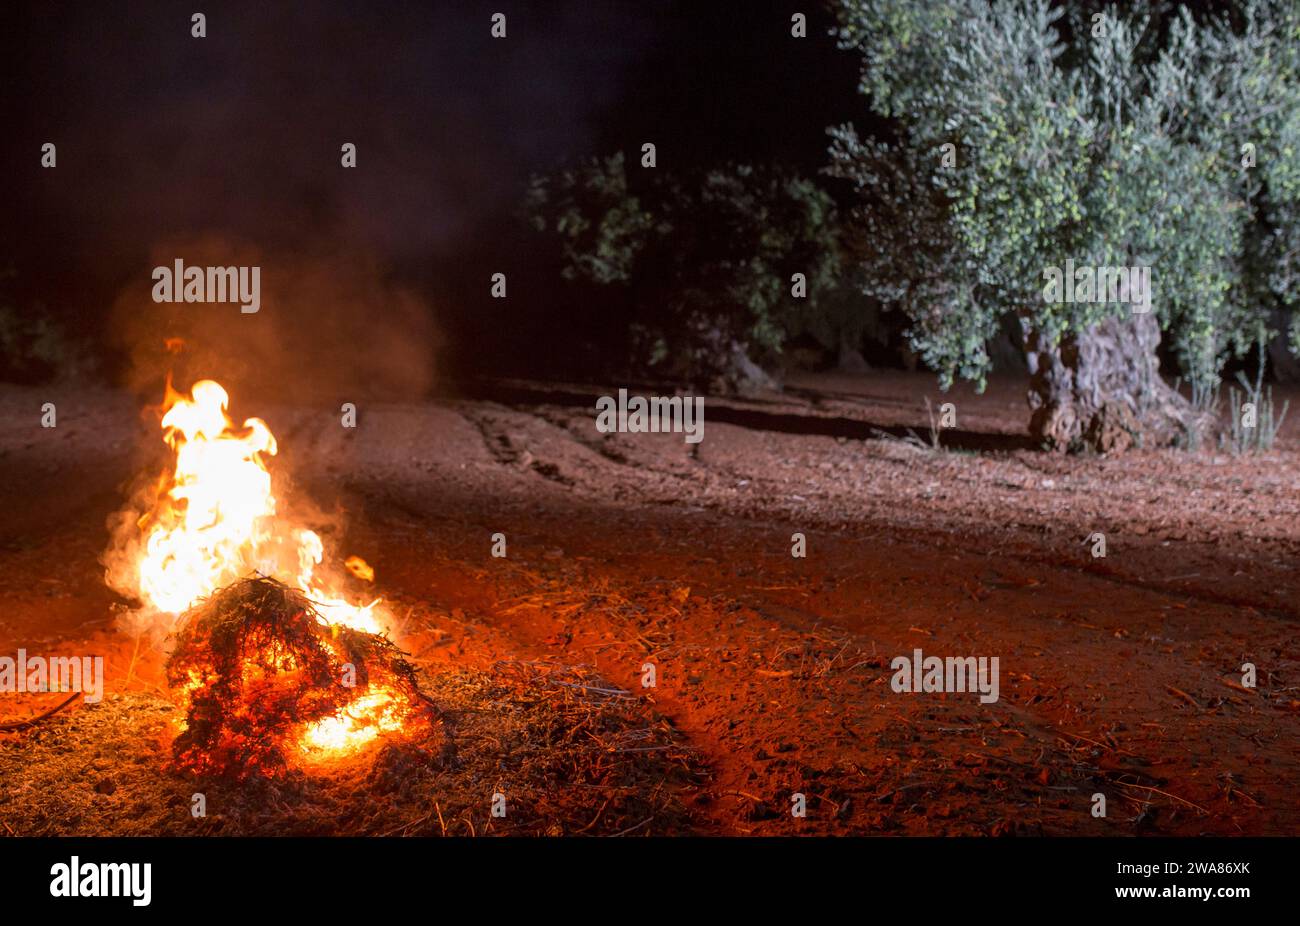 Bonfire lit in an olive grove in the early morning. Table olives harvest season scene Stock Photo